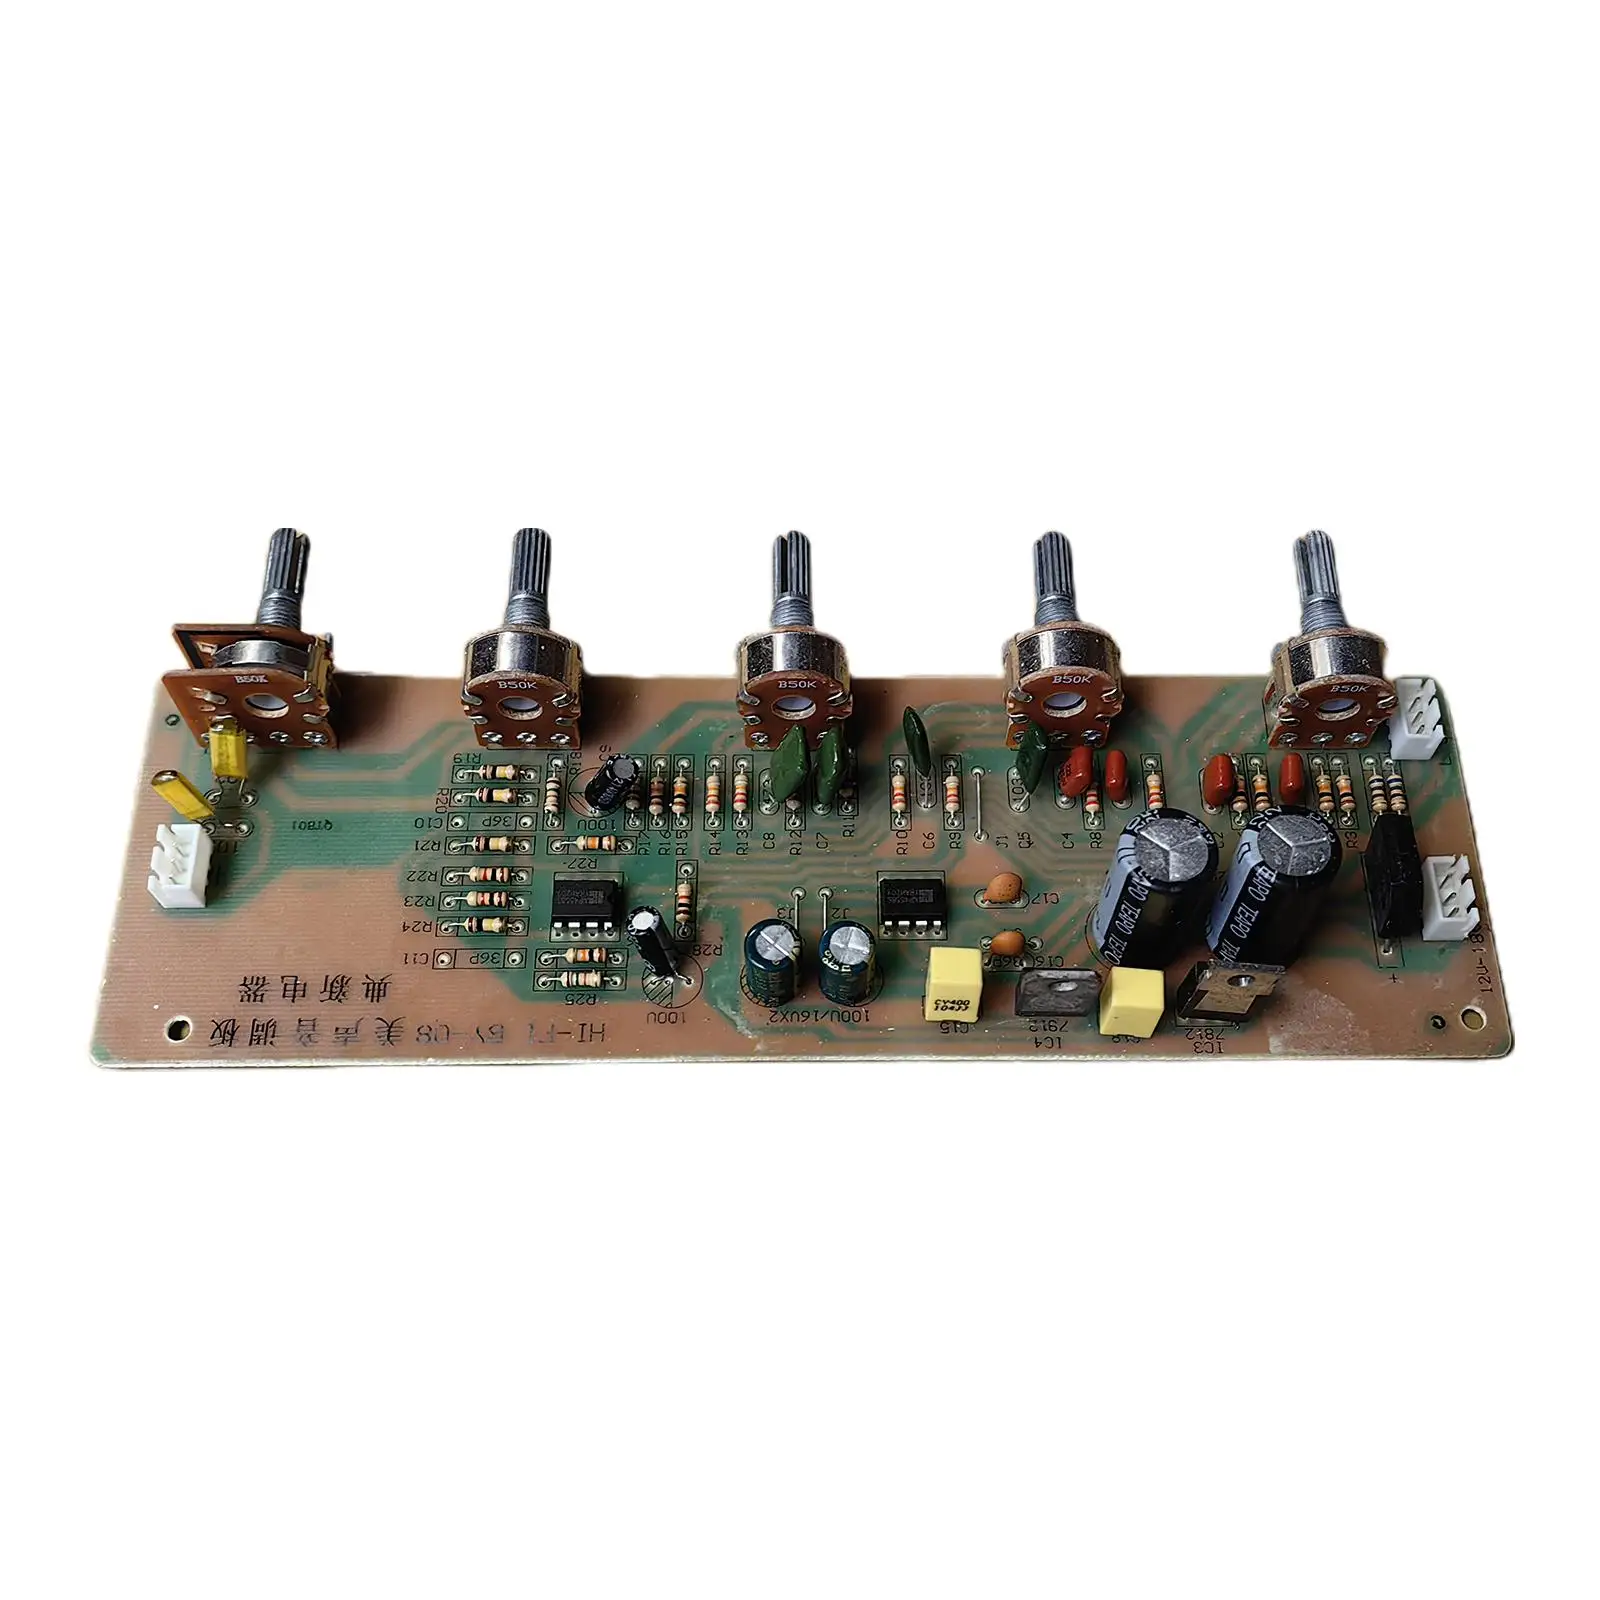 BY08 Stereo Audio Power Amplifier Control Board